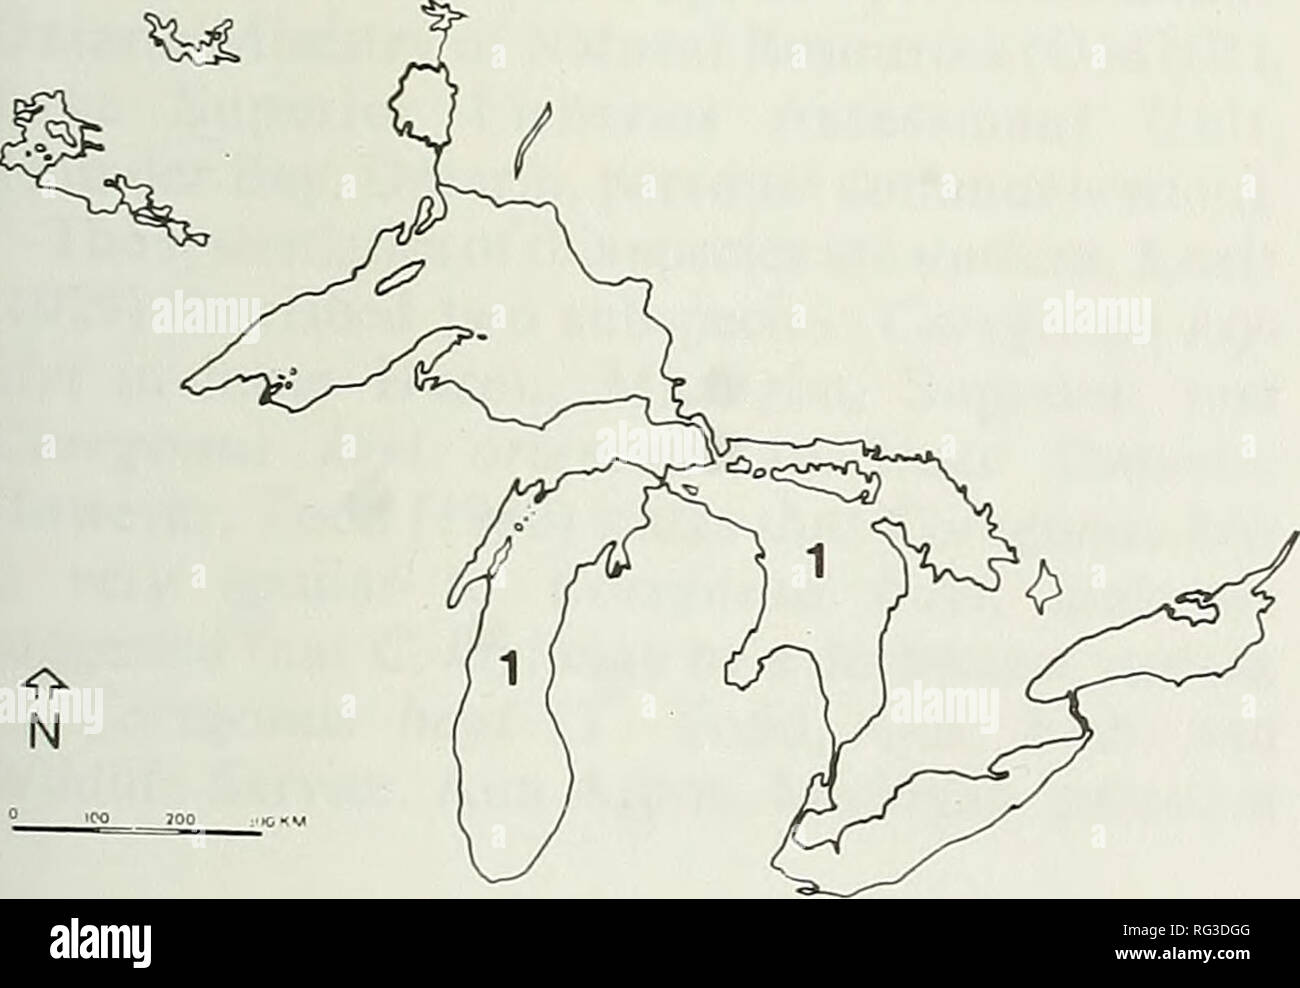 . The Canadian field-naturalist. Figure 1. Deepwater Cisco, Coregonus johannae (from Todd 1980, by permission). Kernan, personal communication) also failed to produce any authenticated specimens of Corego- nus johannae from United States waters. Published information dealing specifically with Coregonus johannae populations in Lake Huron is lacking. Berst and Spangler (1972) state that the larger species of deepwater ciscos (which would include Coregonus johannae) had been selectively removed from Lake Huron by the 1940s as a result of Sea Lamprey predation and commercial fishing, as was the ca Stock Photo